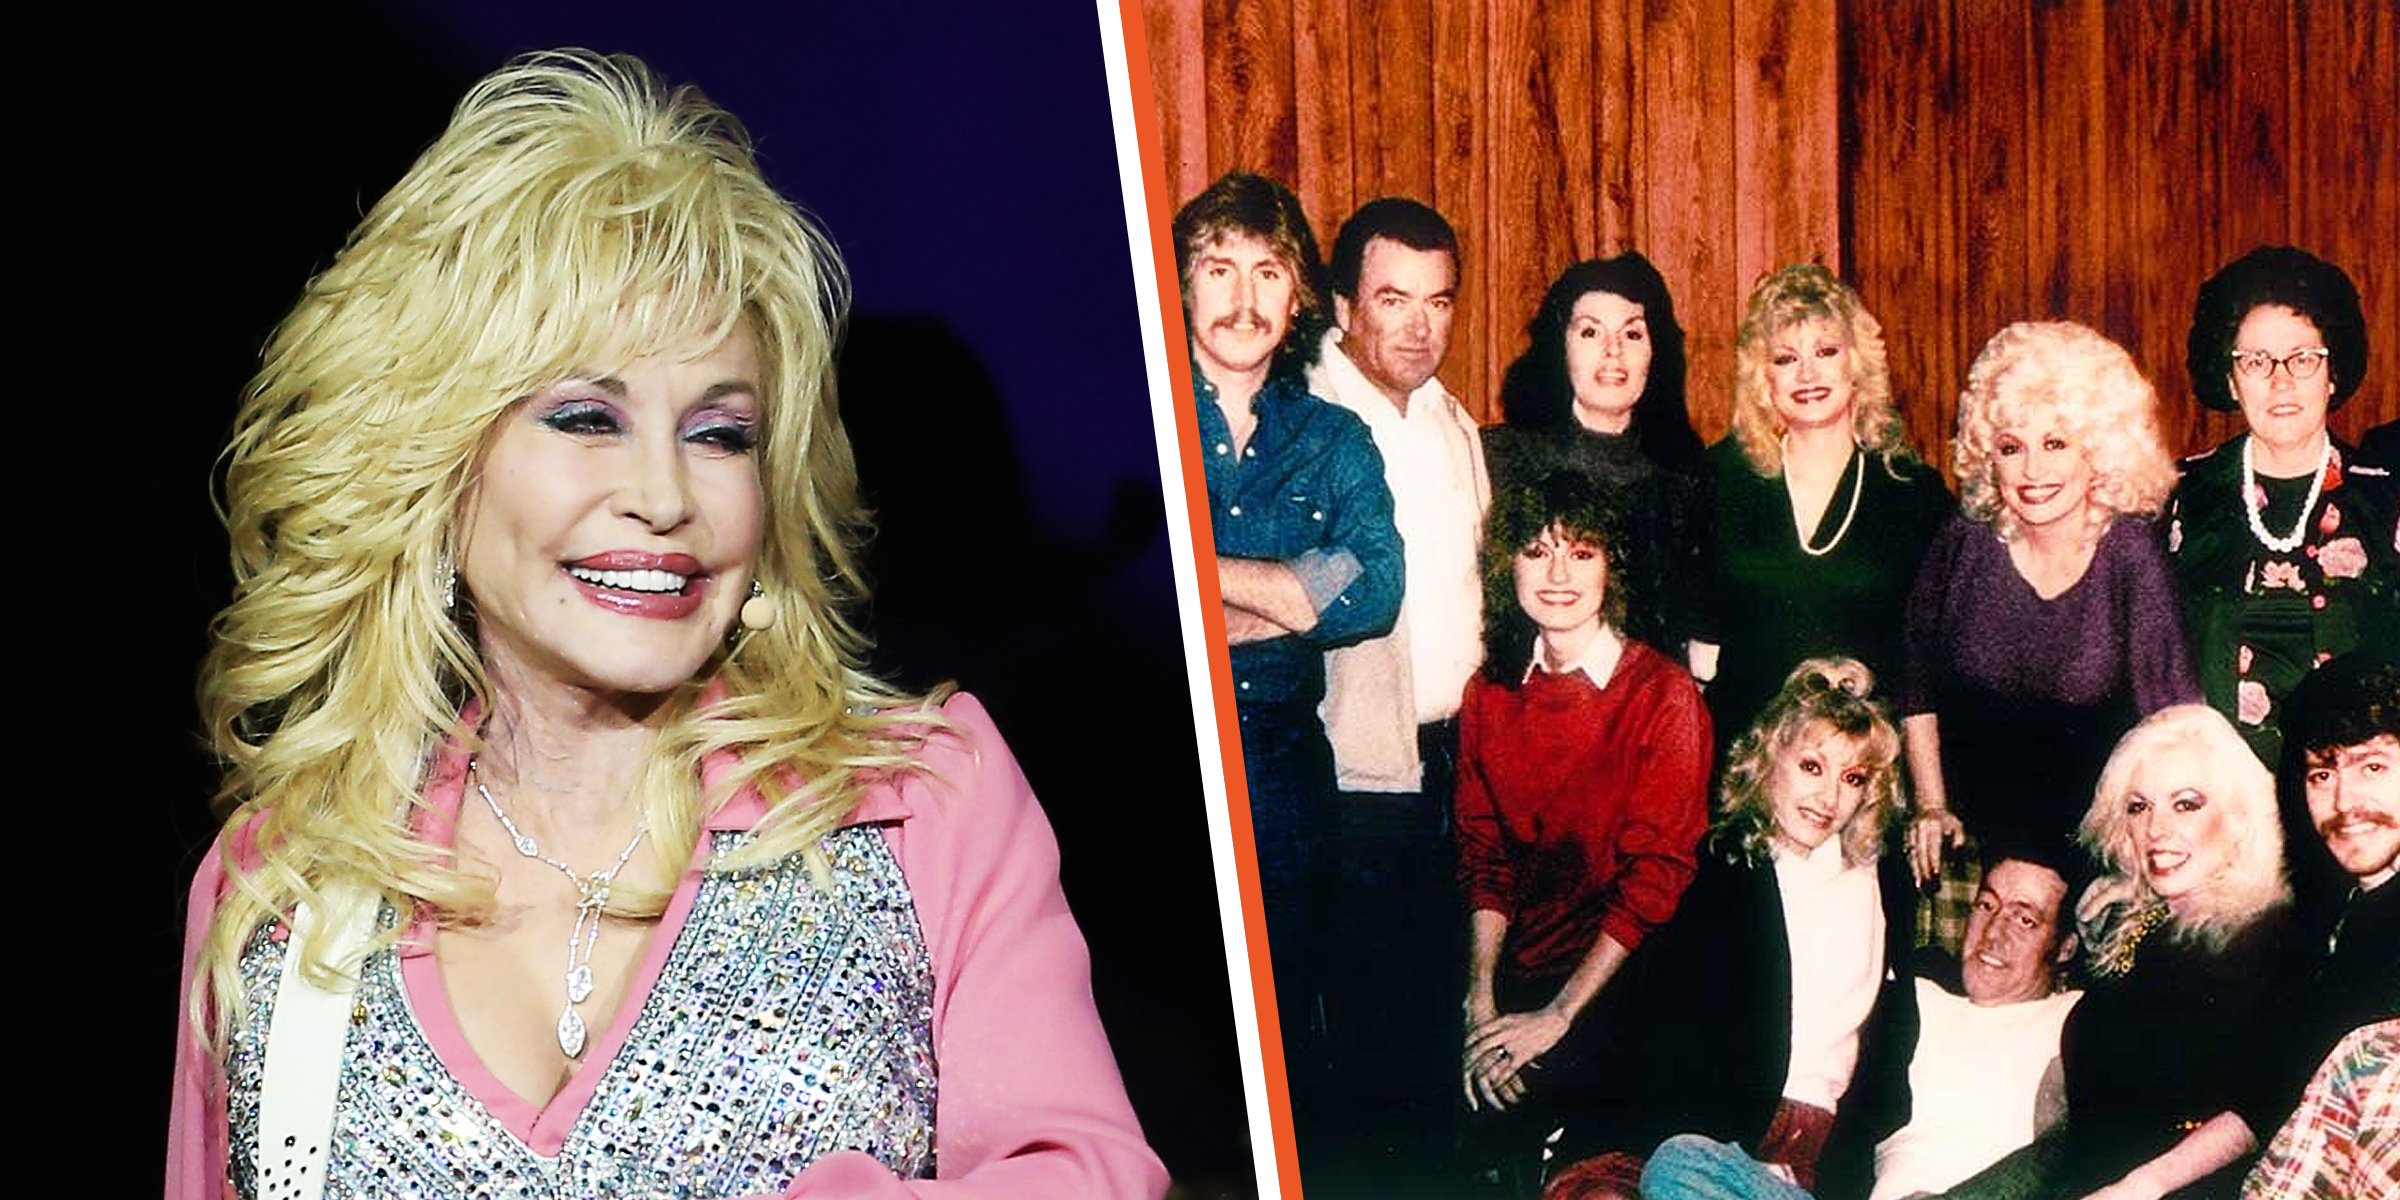 Dolly Parton and her family. | Source: Getty Images/ Instagram@dollyparton